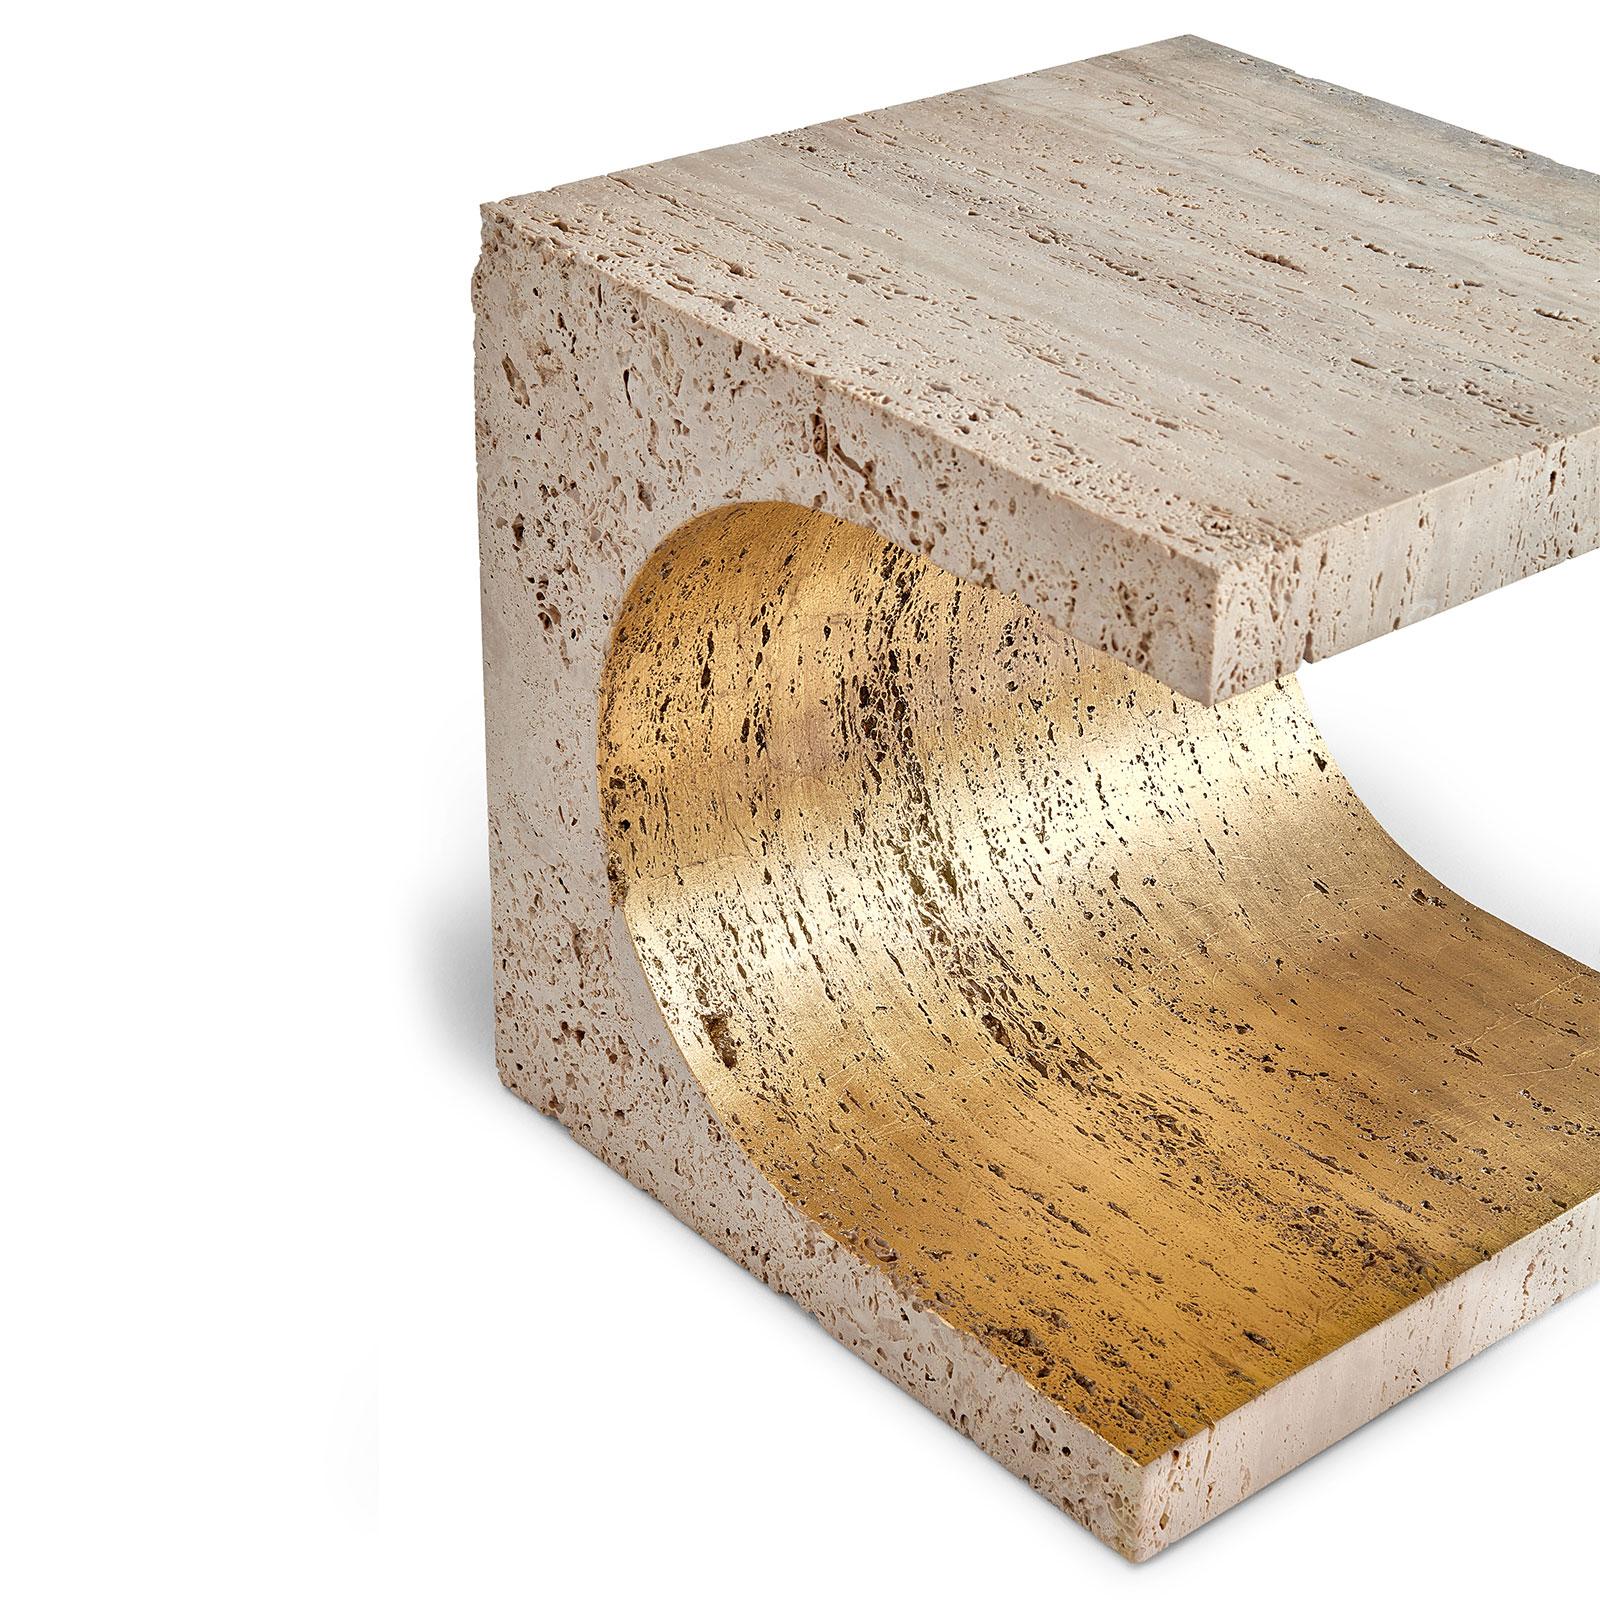 This side table is carved from a stone block, and the boundaries are either angular or curved. The porous texture of the Travertine breathes on the surface of the top and sides. And in its core, the gold leaf is hand gilded in the stone.
Body: